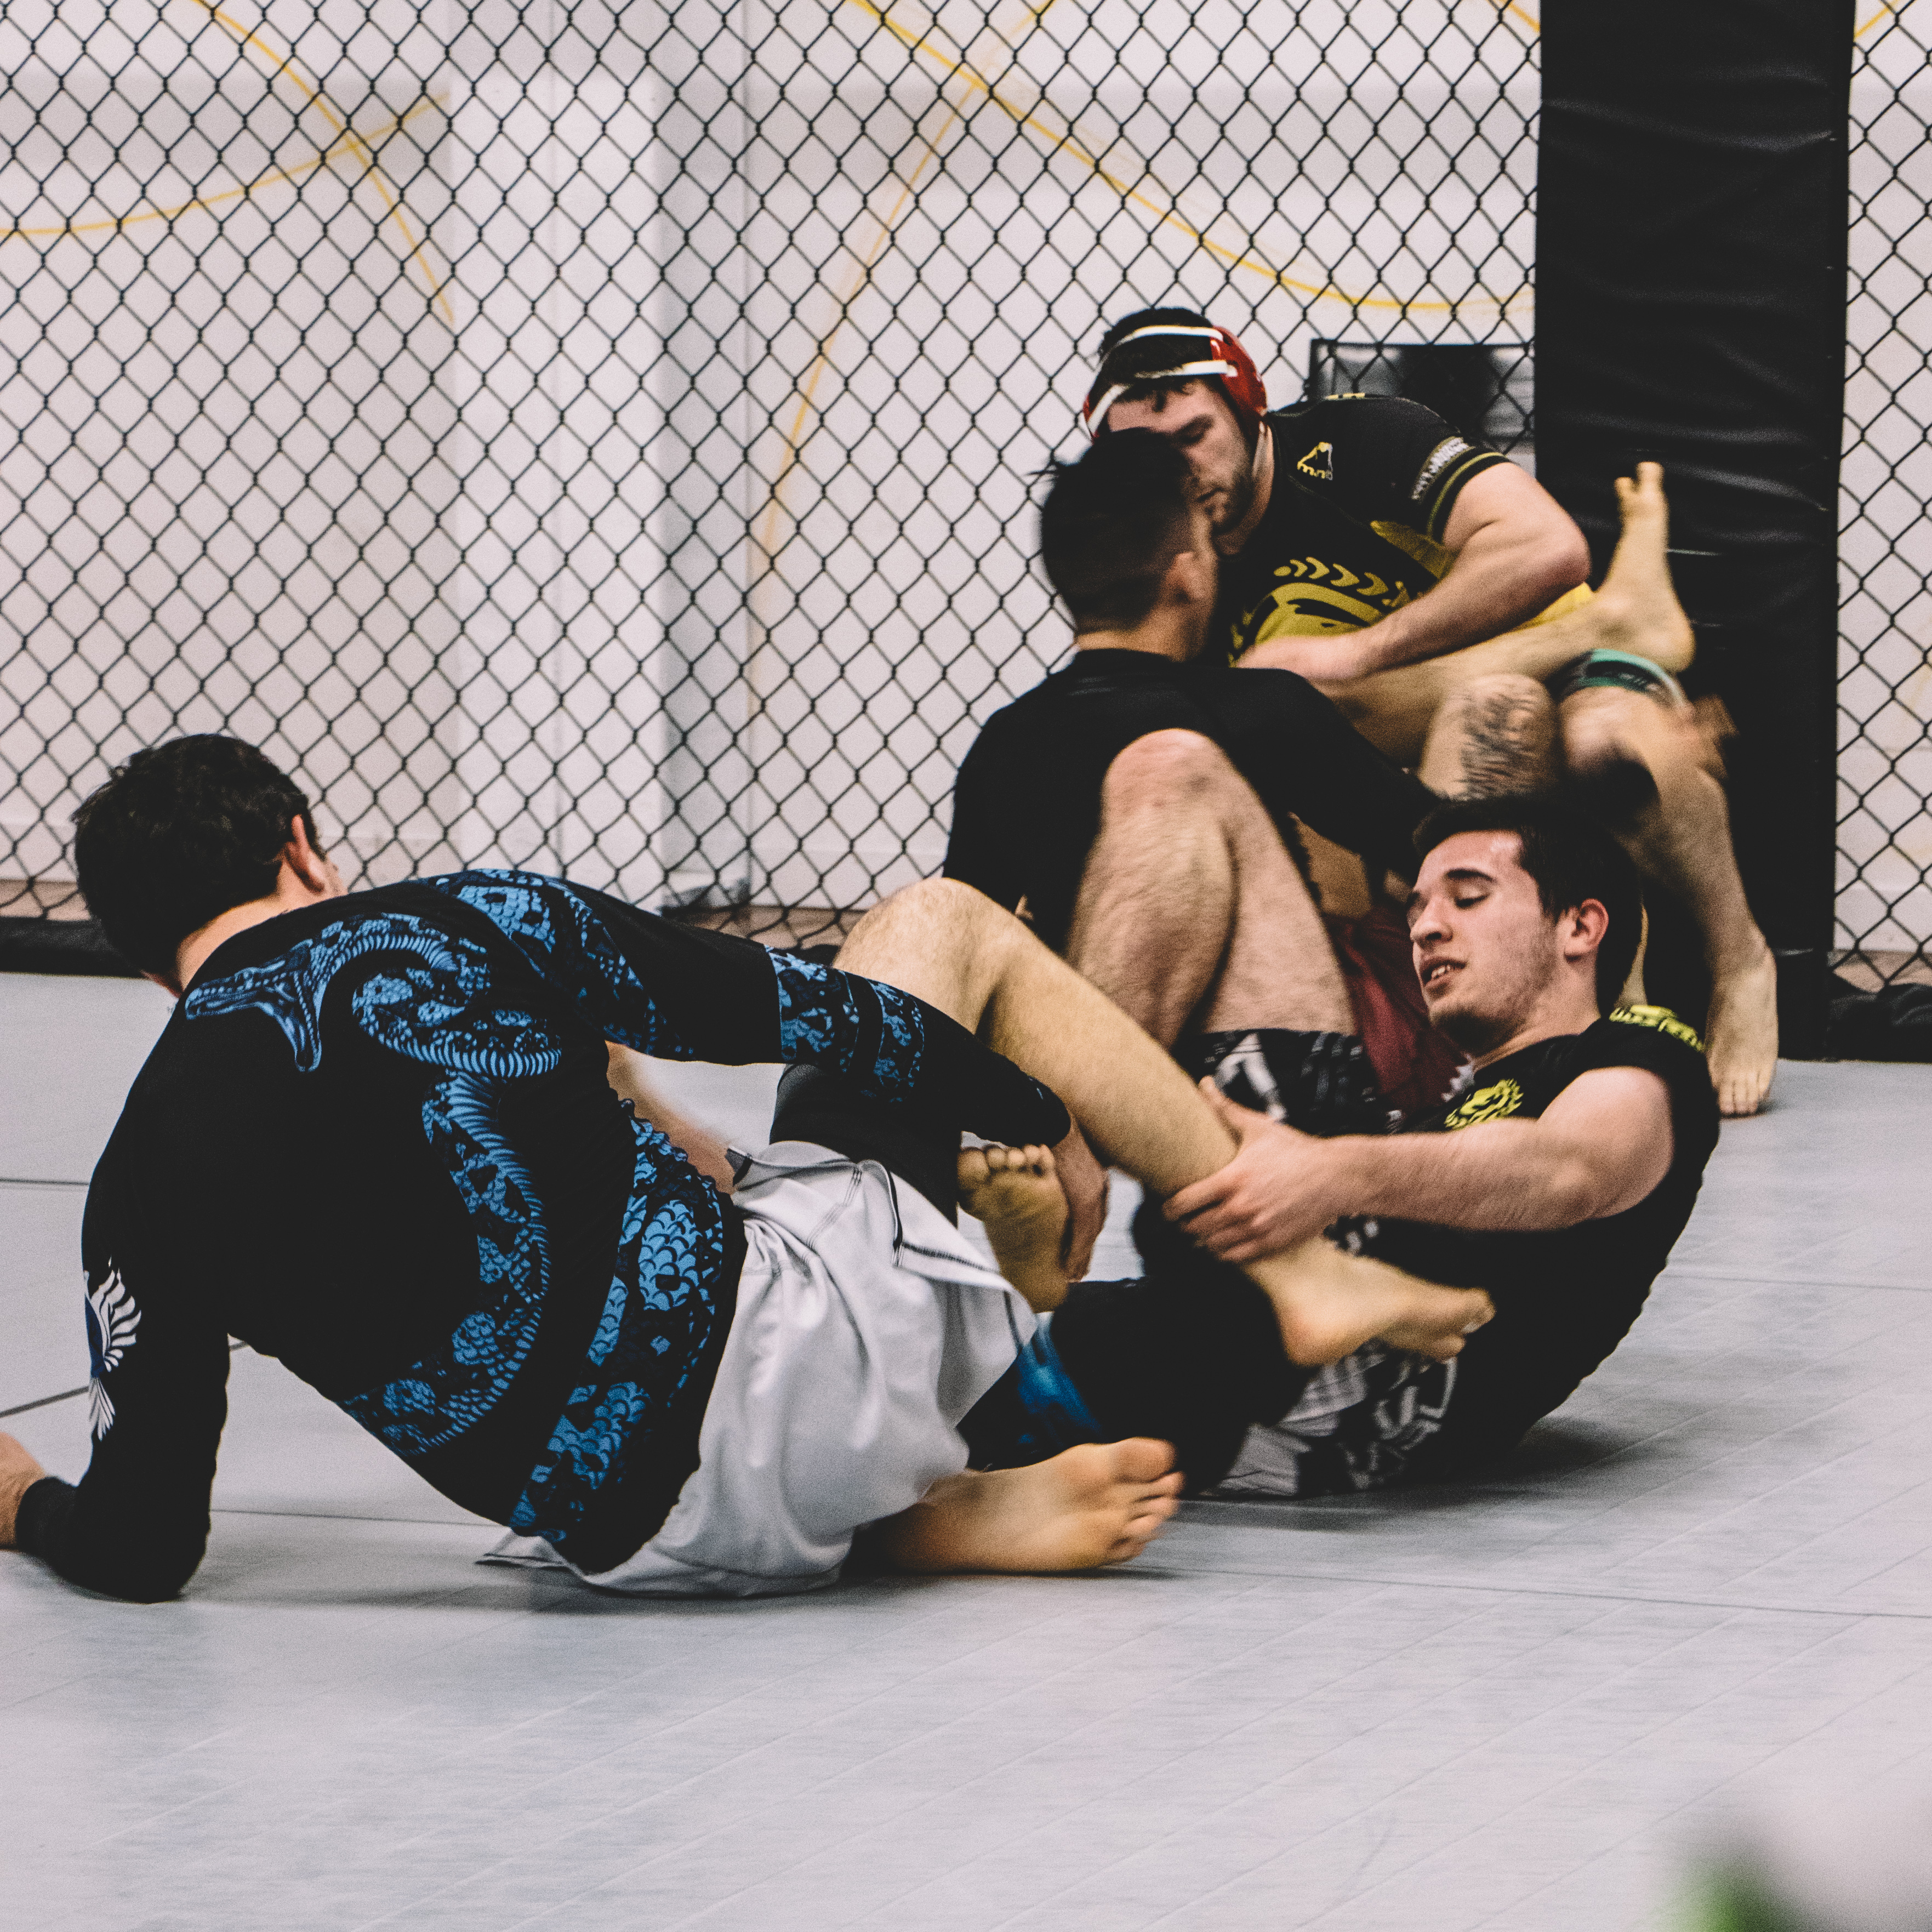 Feel Like You Aren’t Improving in BJJ ? Some Practical Tips to Accelerate Progress